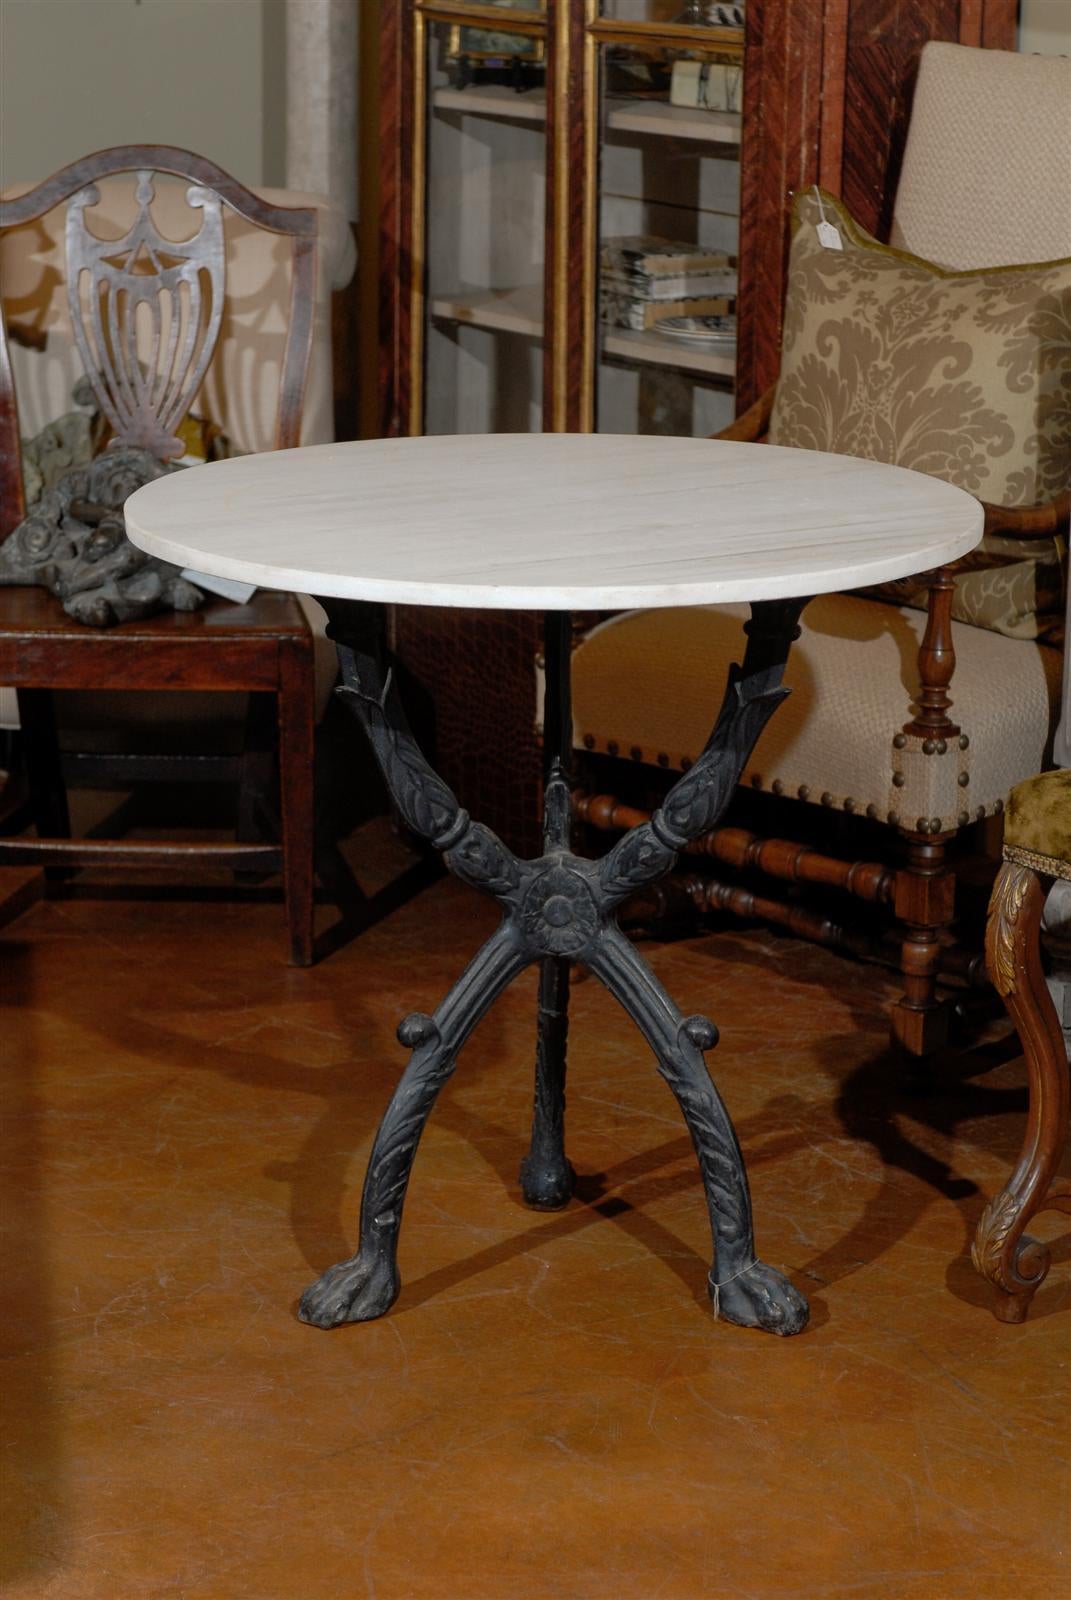 A French wrought-iron and marble top round bistro table with tripod base from the 19th century. This French bistro table features a circular white veined marble top, sitting above a wrought-iron tripod base. A perfect tribute to the French ironwork